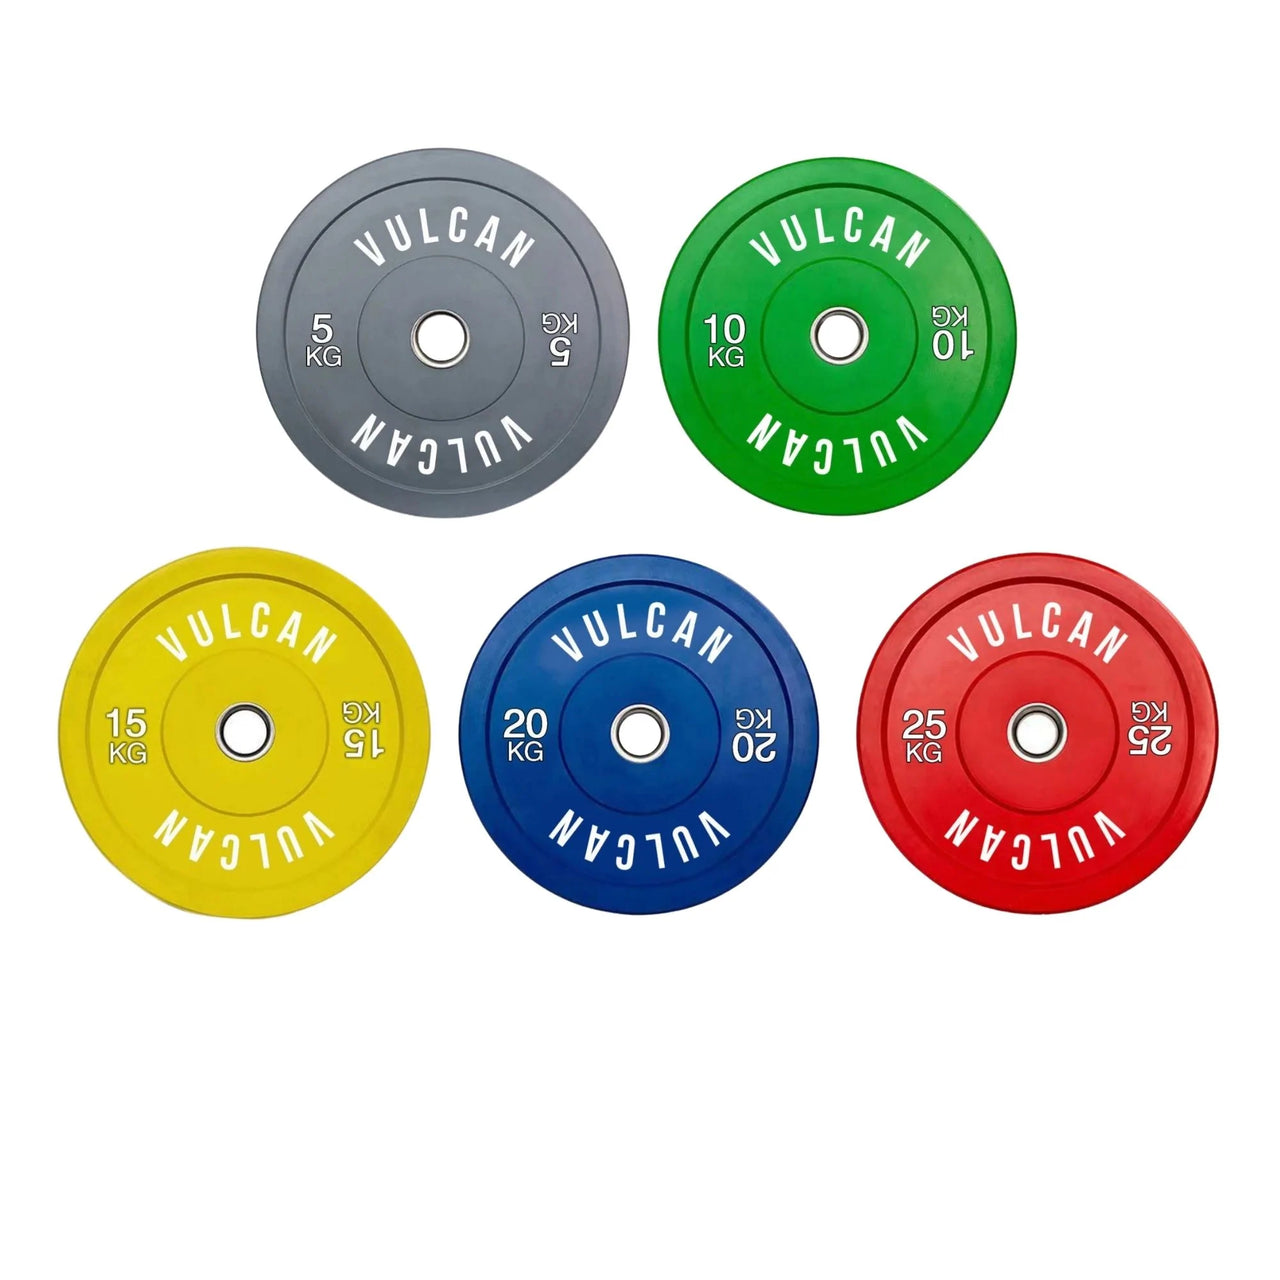 VULCAN Olympic Colour Bumper Plates (150KG SET) | IN STOCK